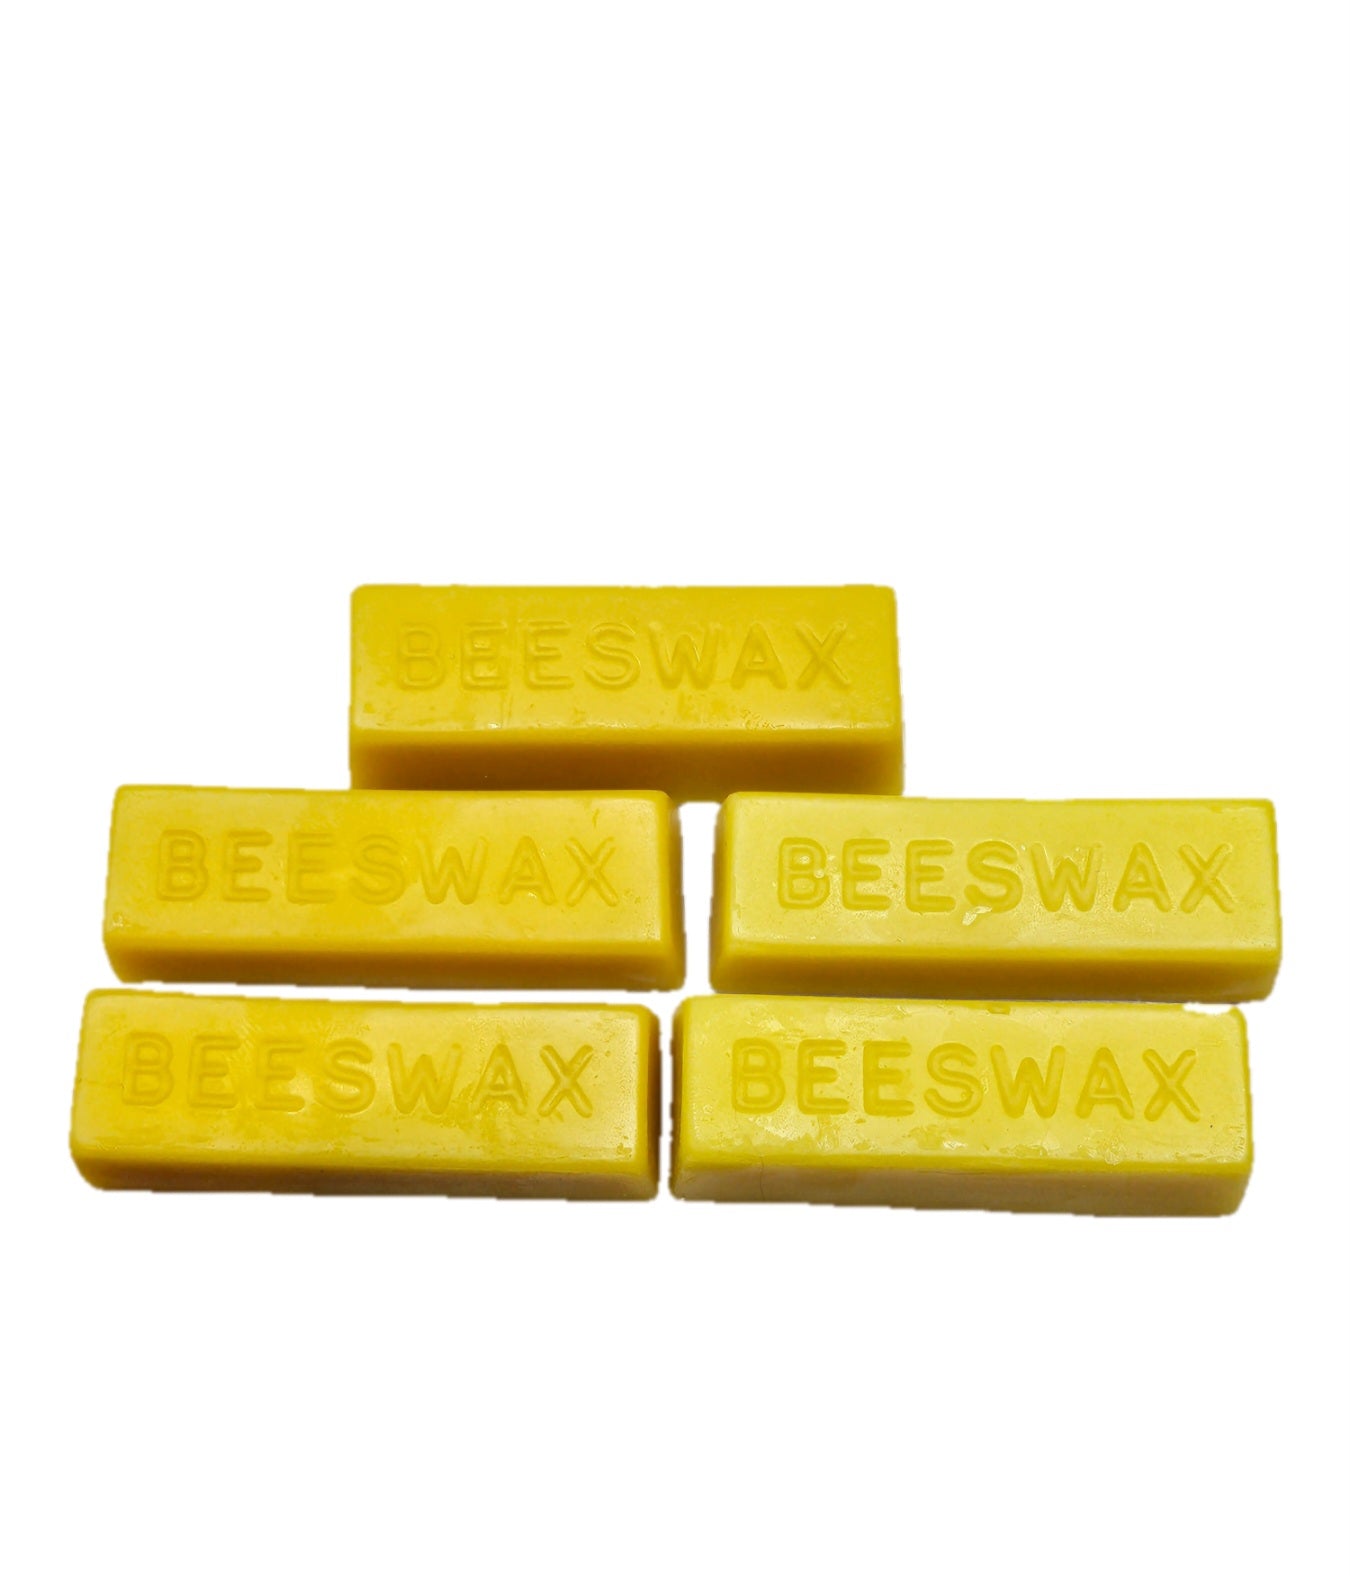 Pure Beeswax Block 28g (Multipack)